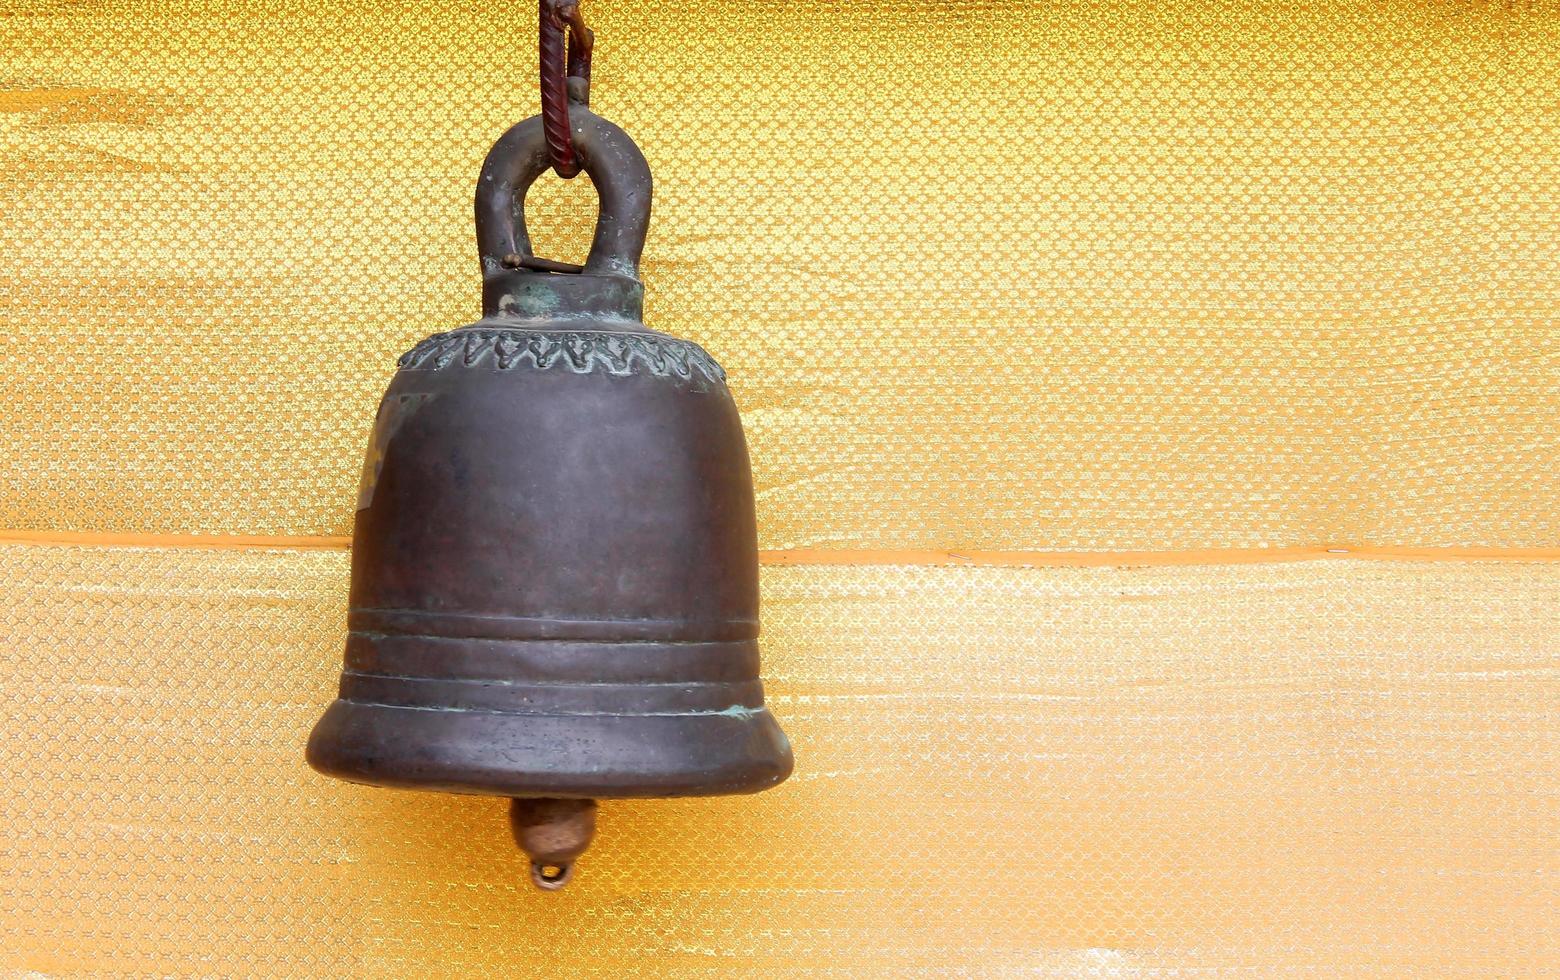 Bells in the temple at Thailand photo